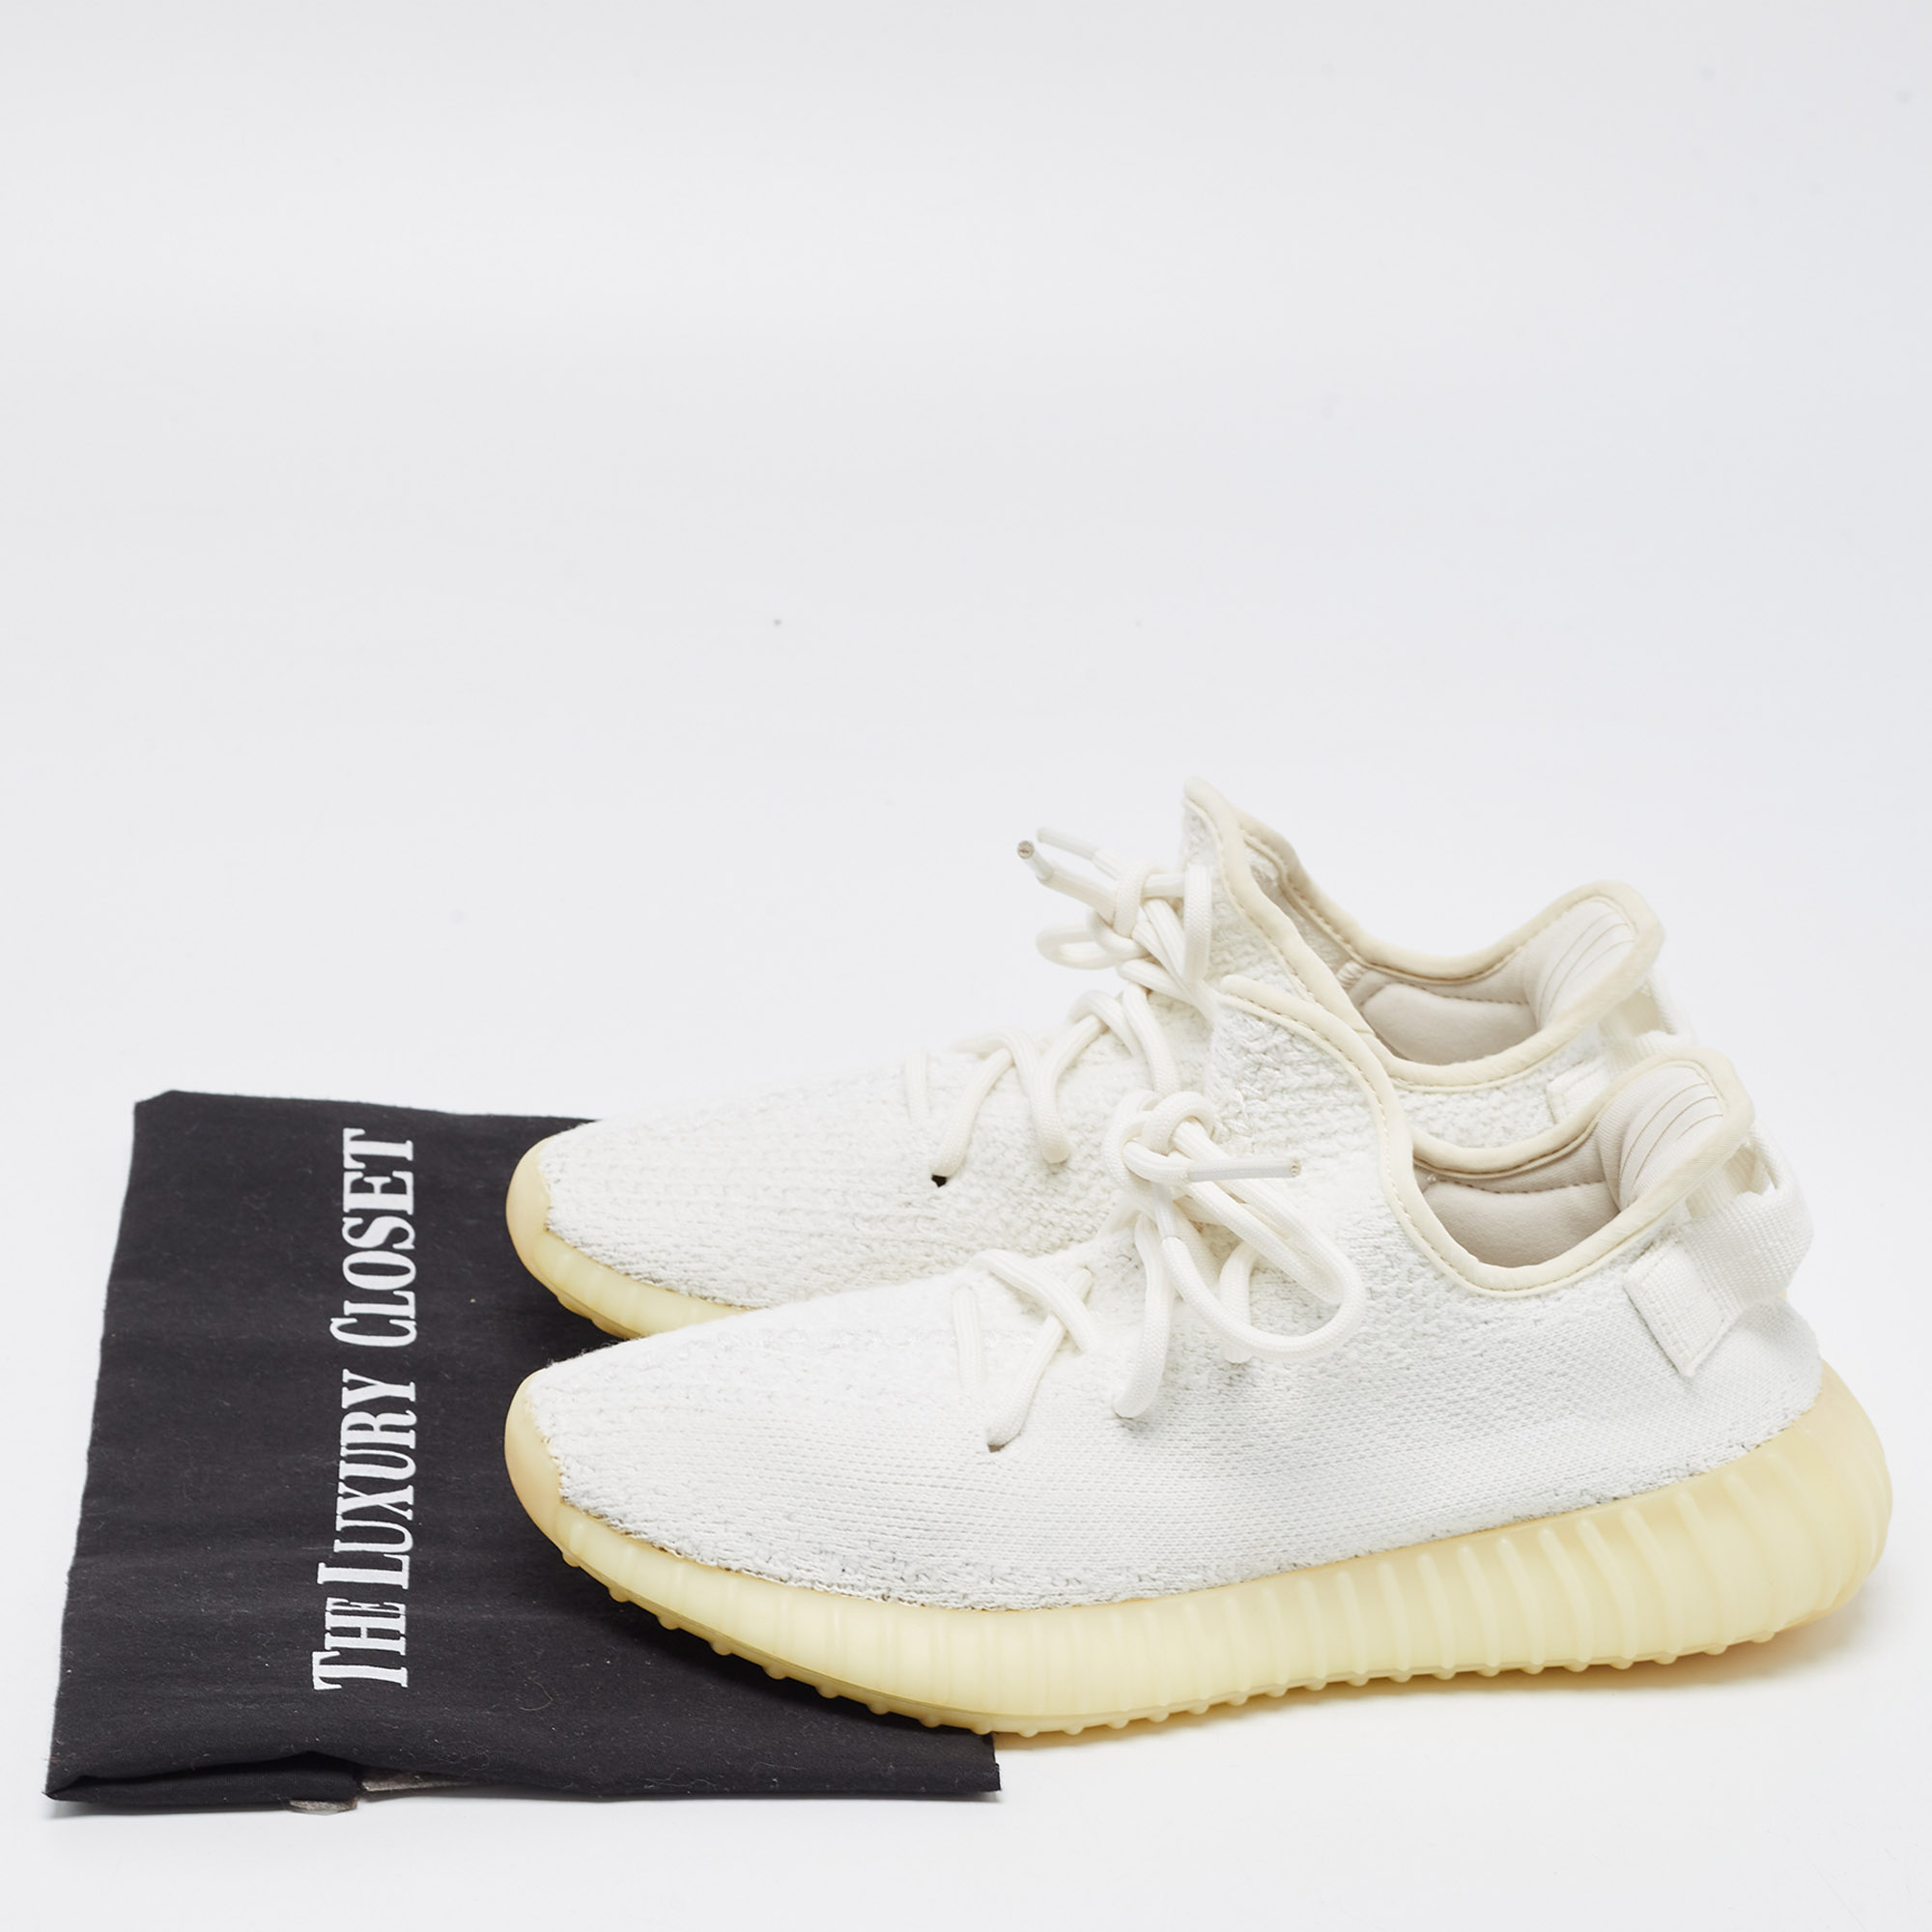 Yeezy X Adidas White Knit Fabric Boost 350 V2 Triple White Sneakers Size 38 2/3